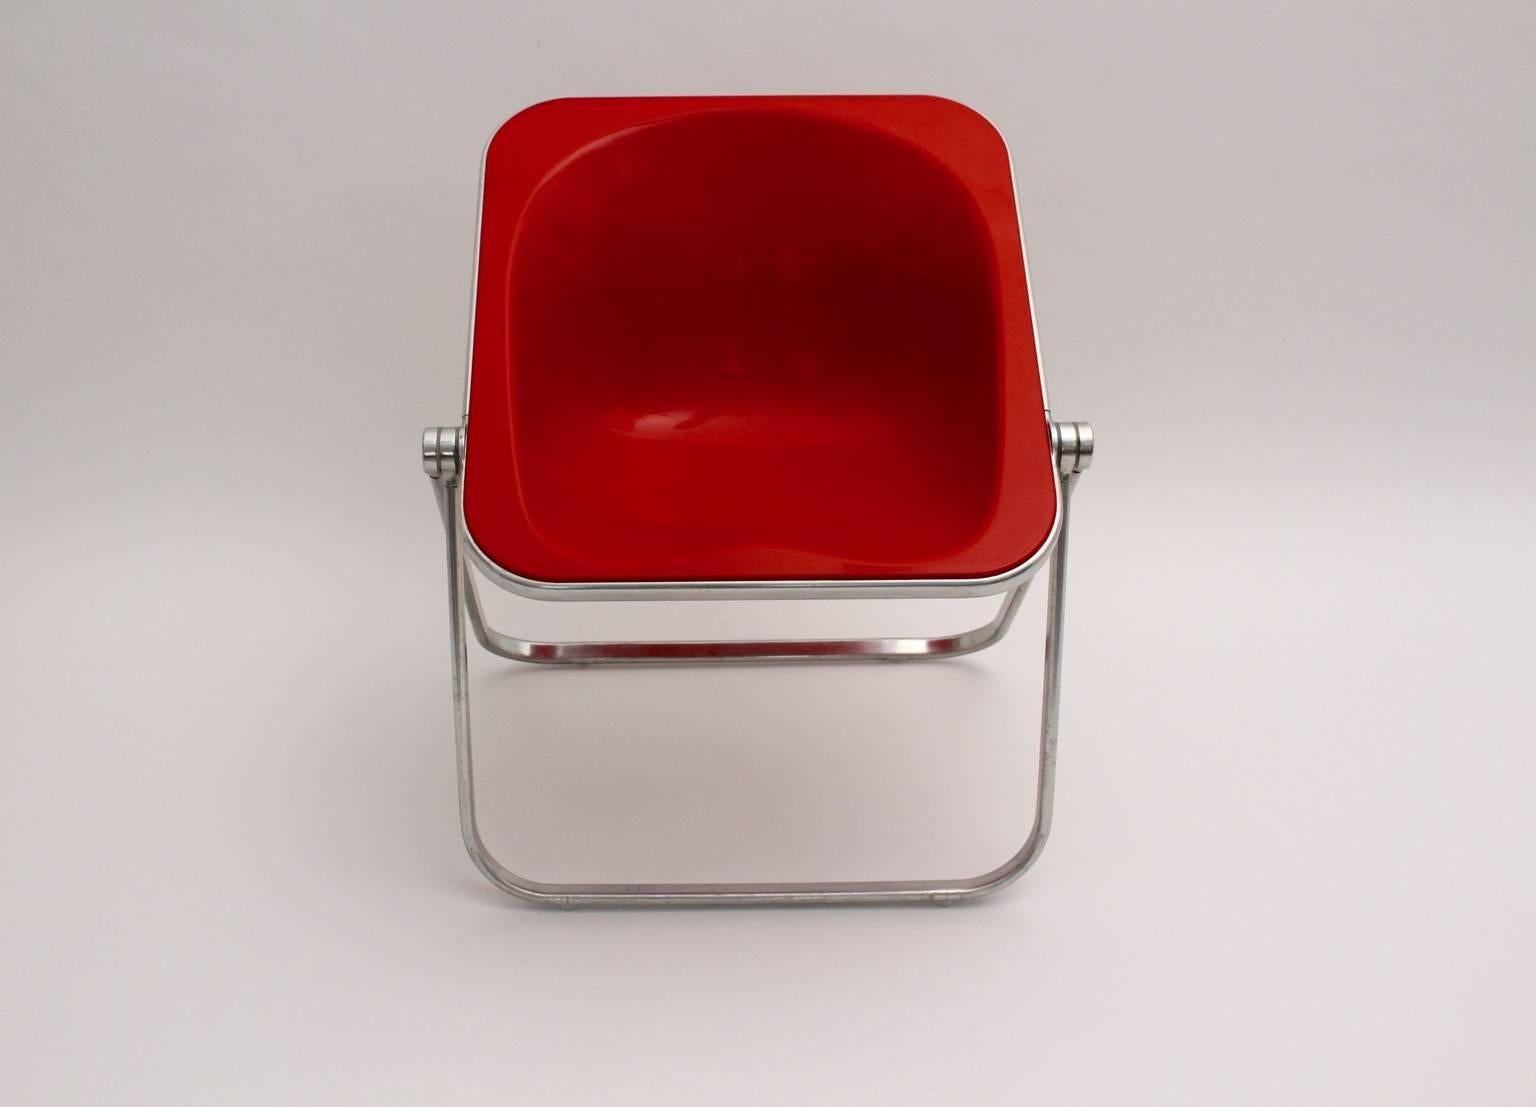 Italian Giancarlo Piretti Space Age Red Plastic Vintage Armchair Plona 1969, Italy For Sale